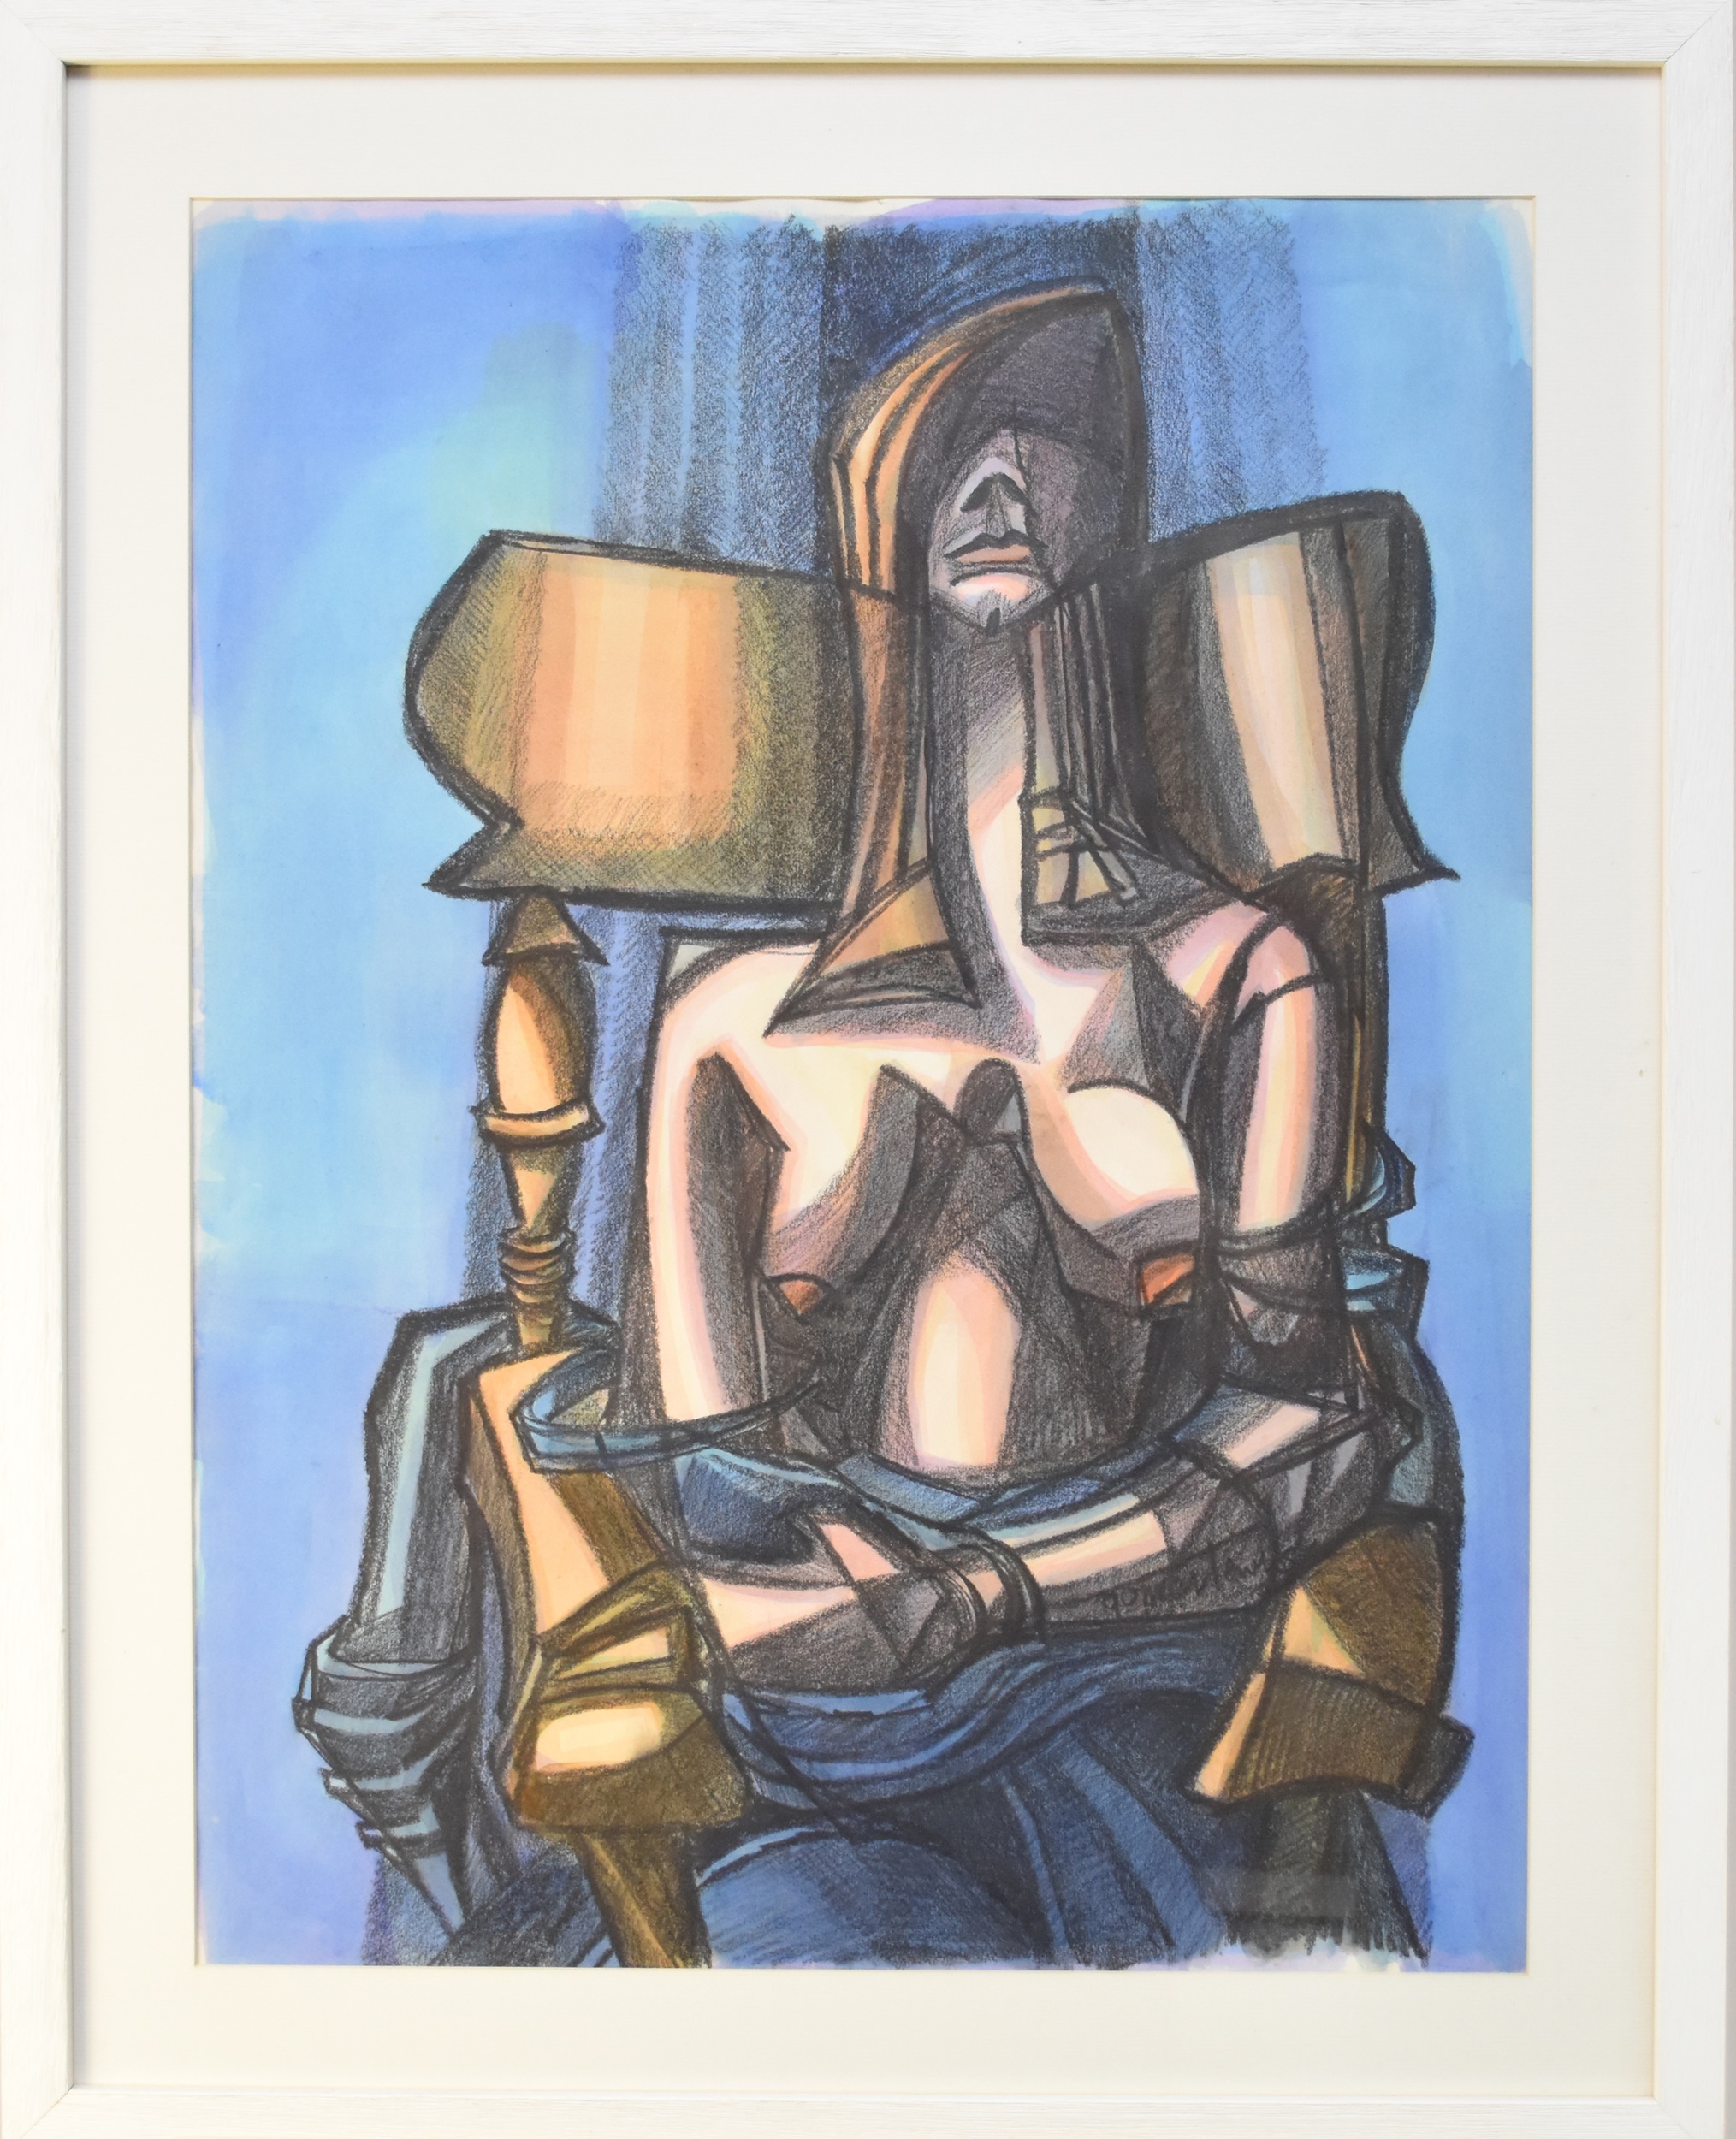 Gomer Lewis (Welsh 1921-1994) Seated Lady, mixed media, measurements 72 x 54 cm, frame 88 x 70 cm - Image 2 of 2